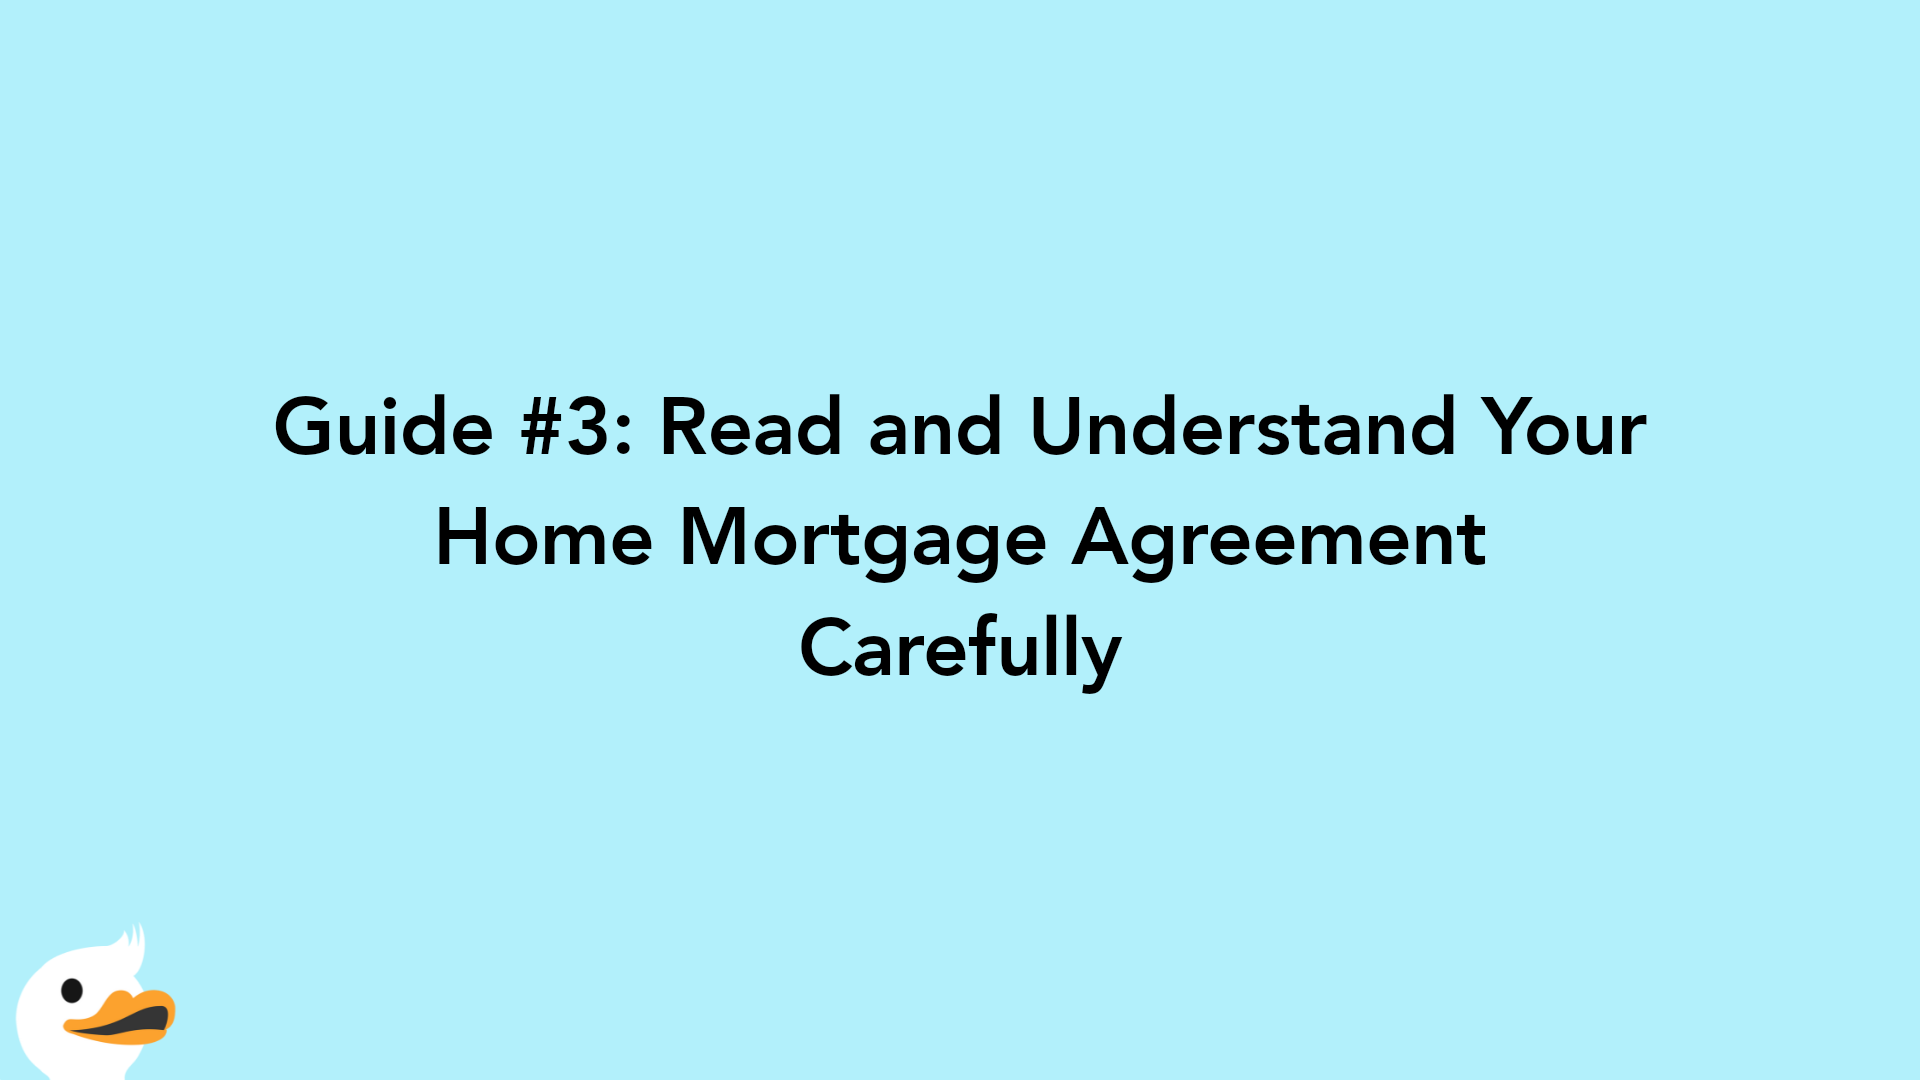 Guide #3: Read and Understand Your Home Mortgage Agreement Carefully